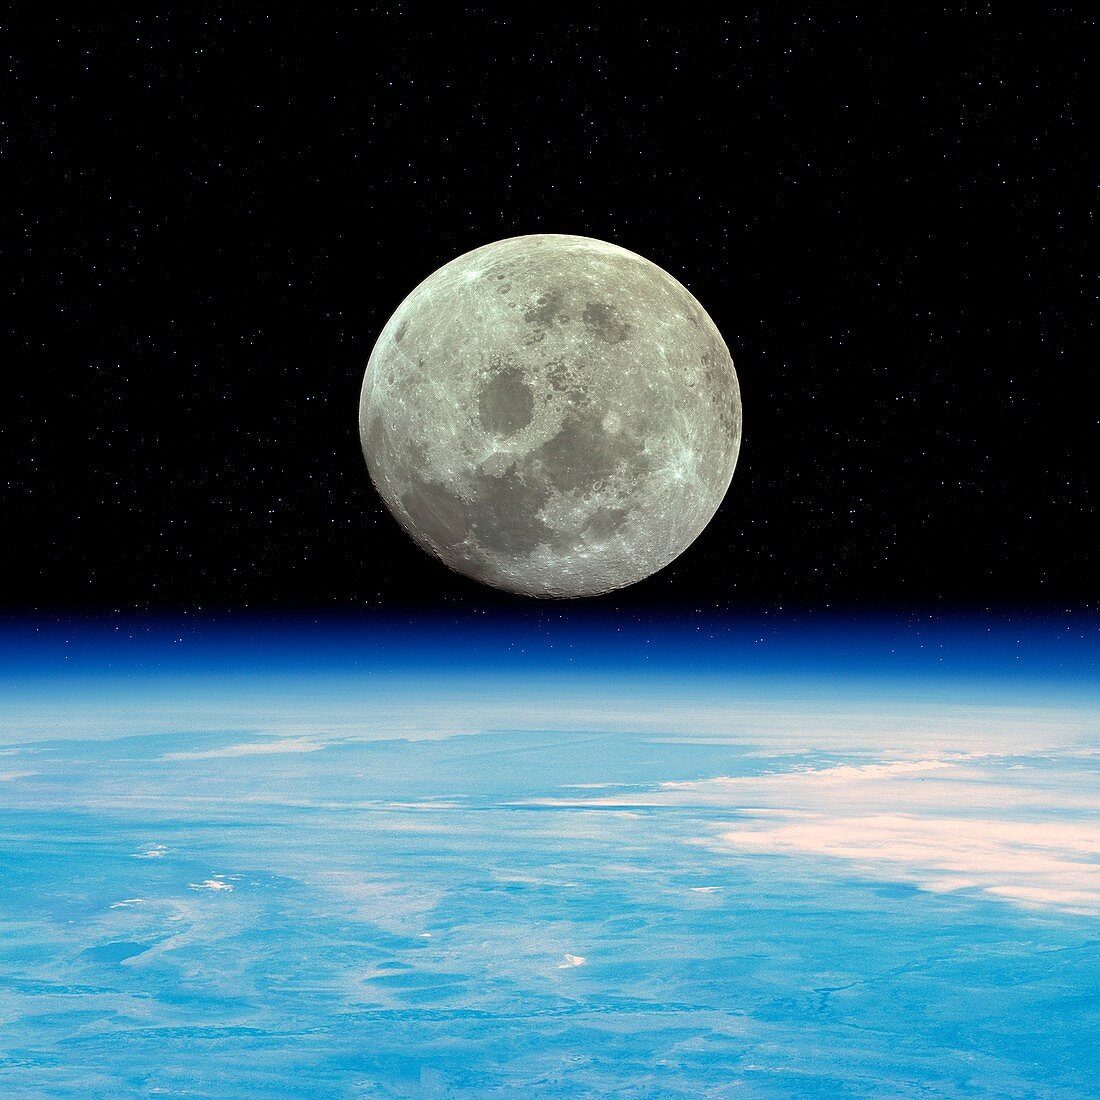 Moon over the Earth,illustration